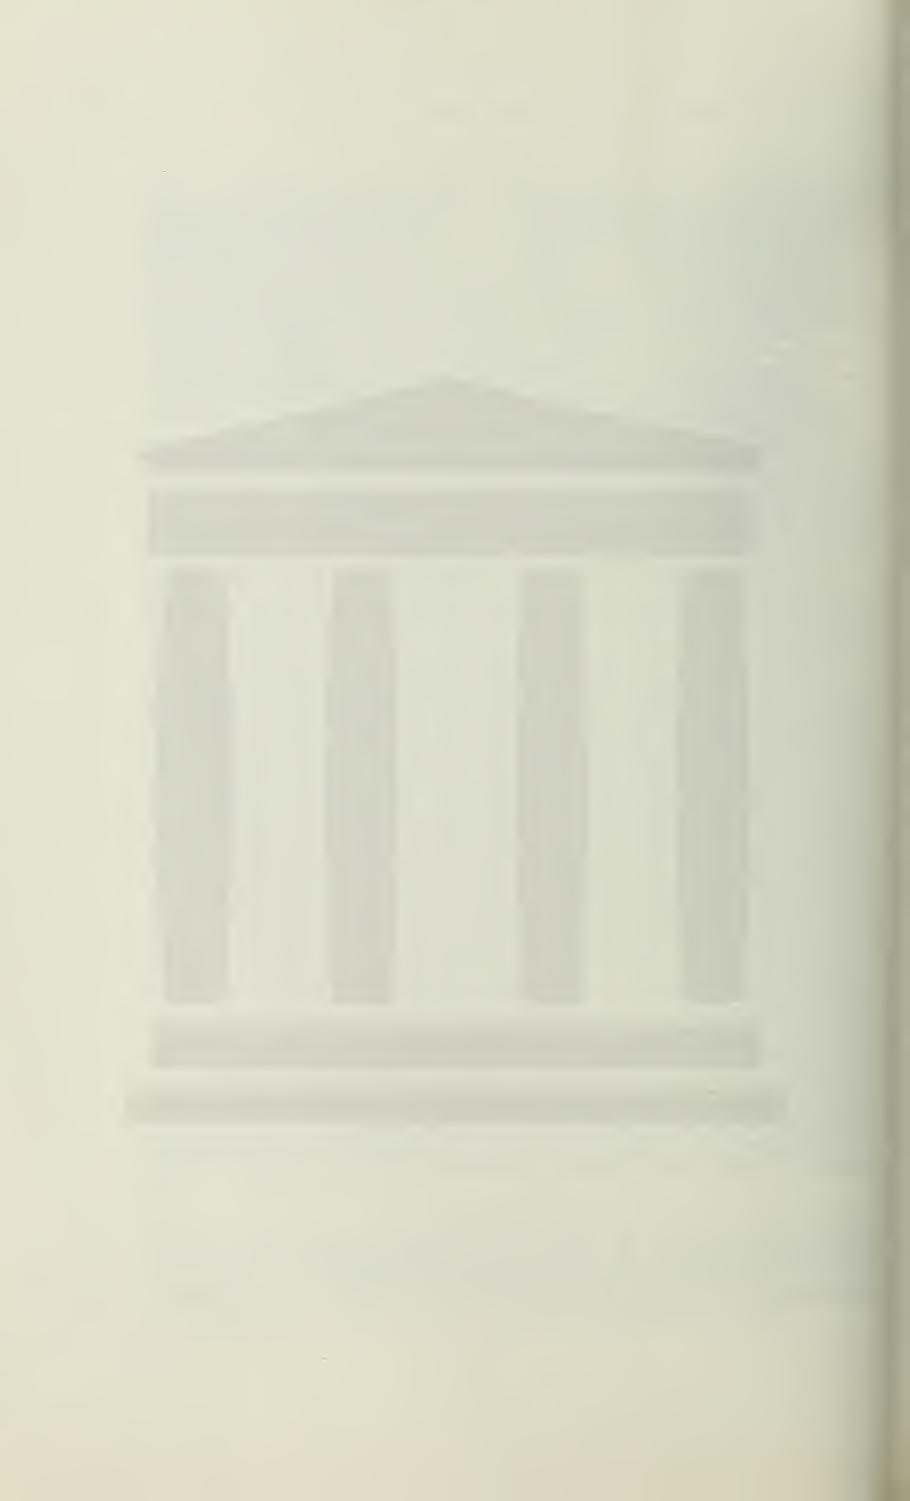 Digitized by the Internet Archive in 2012 with funding from University of